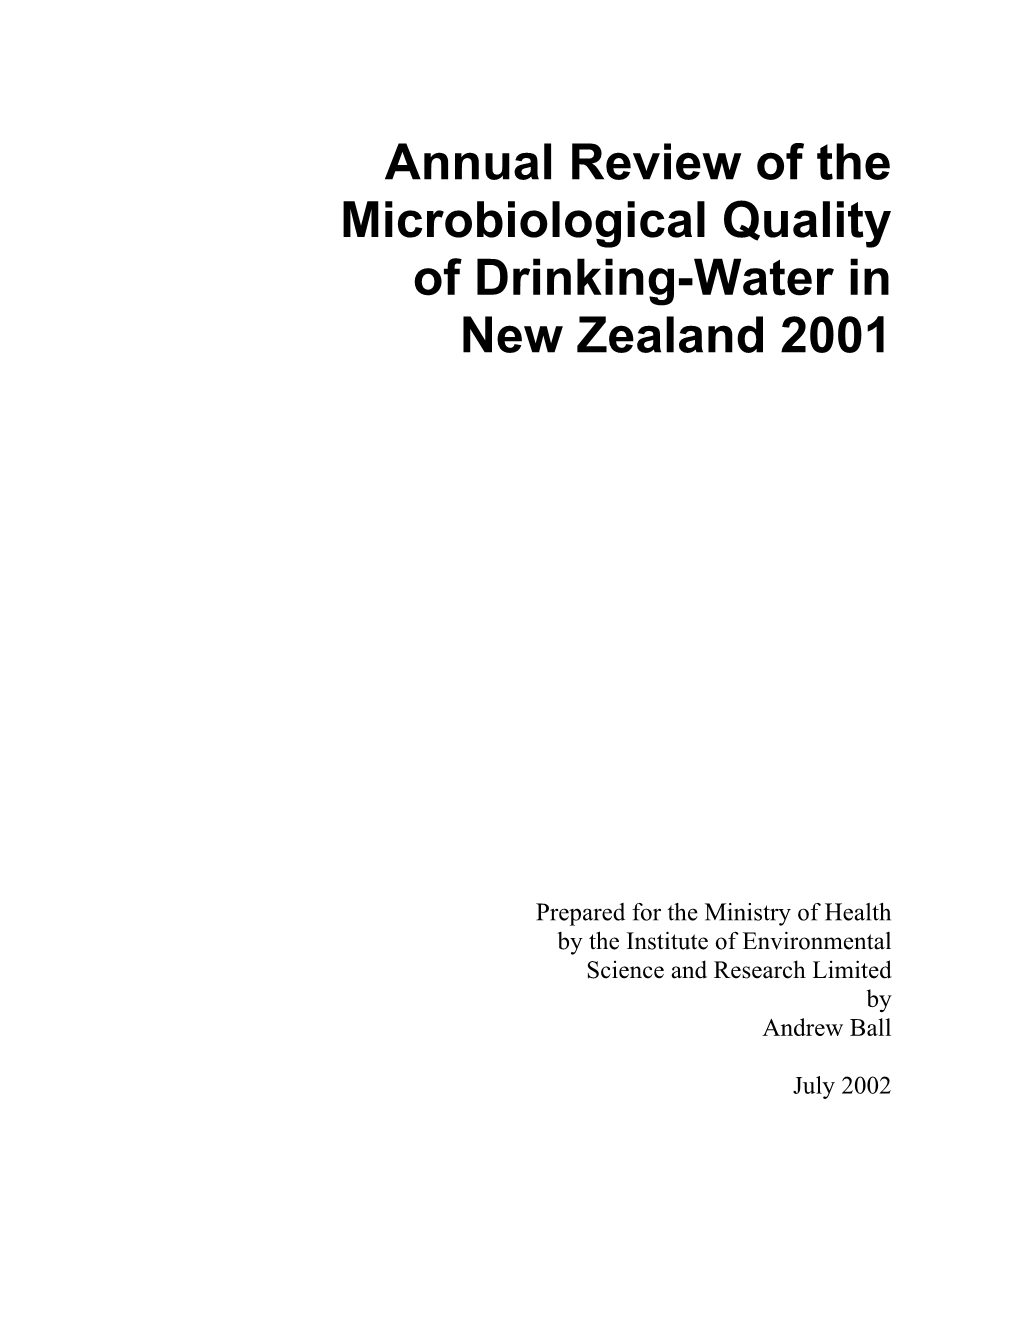 Annual Review of the Microbiological Quality of Drinking-Water in New Zealand 2001